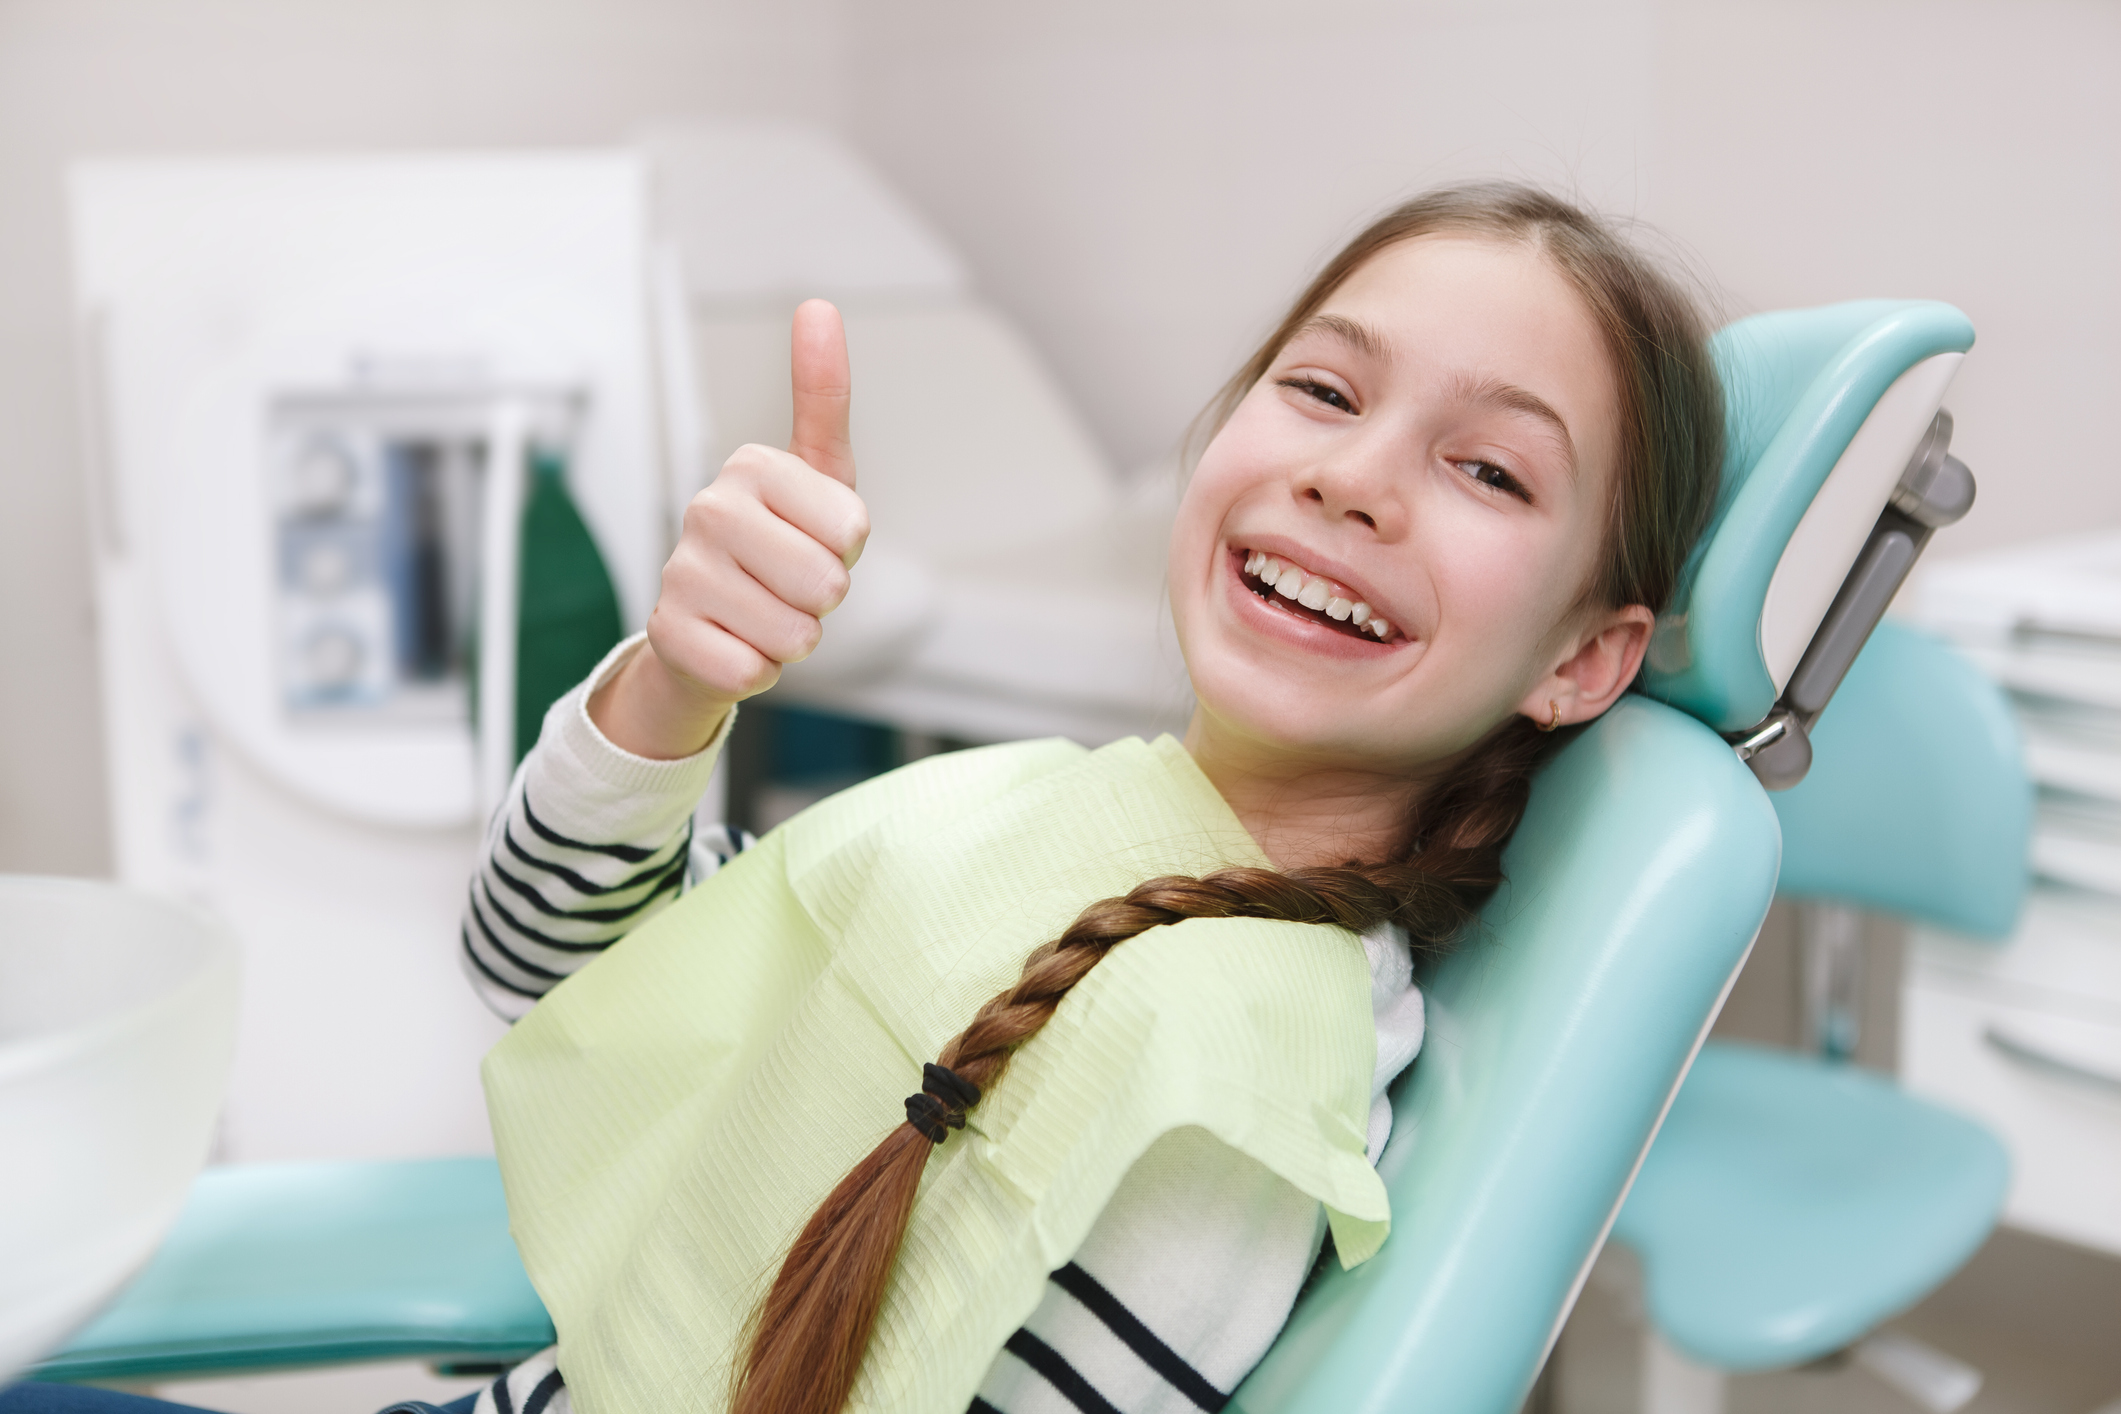 Keep Calm: There is Sedation Dentistry